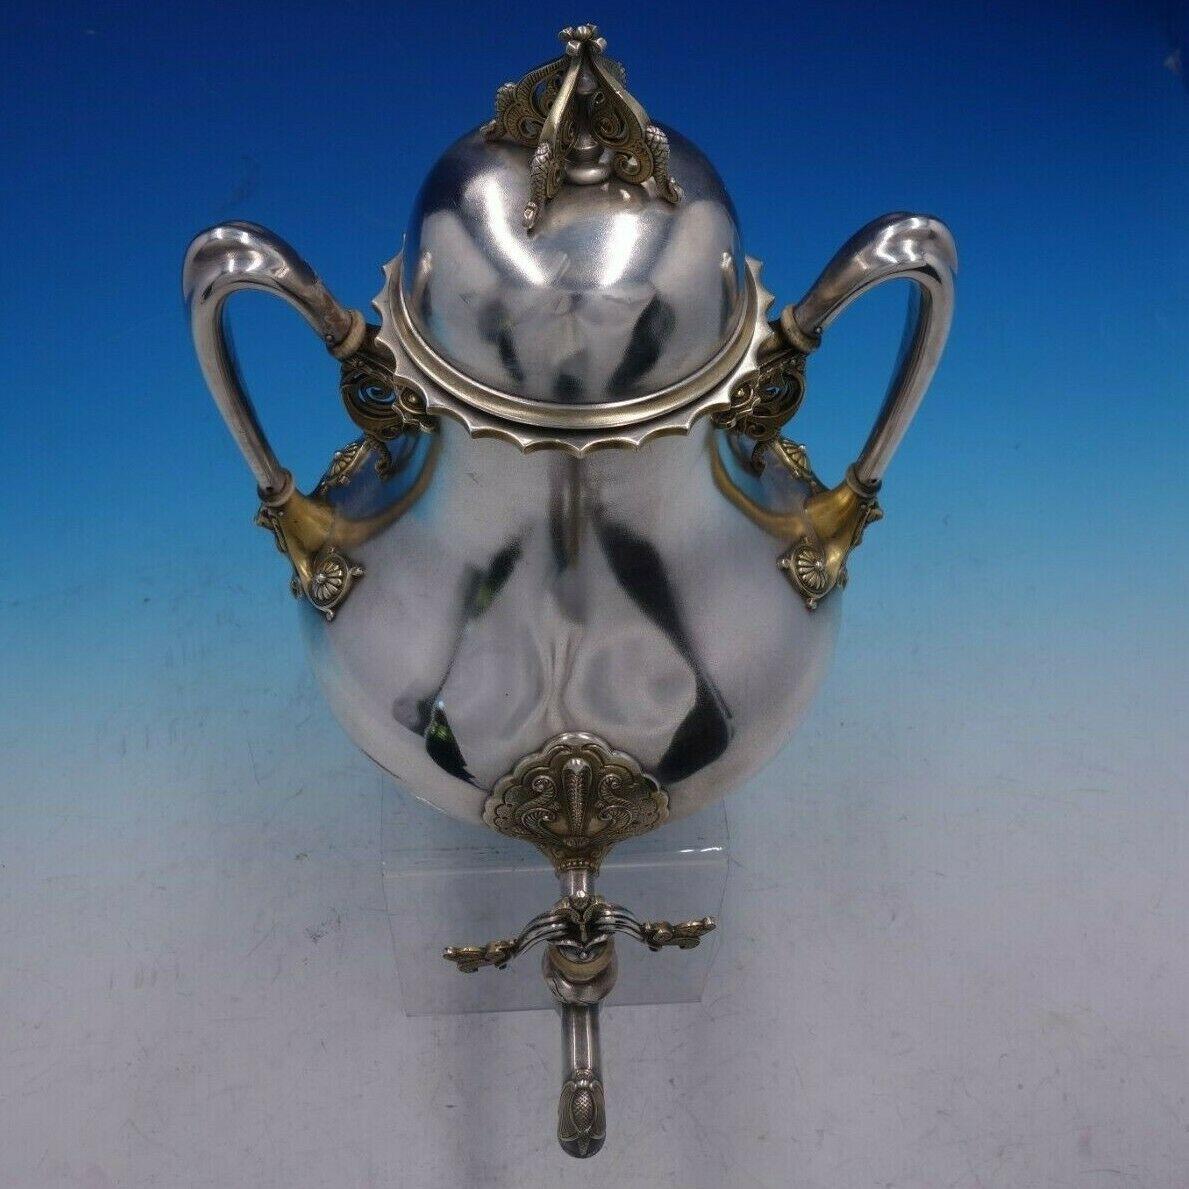 Tiffany & Co.

Superb Moresque by Tiffany & Co. sterling silver coffee kettle or urn from 1848-1873 with gold highlights and elaborate openwork handles, pattern 1770. Gorgeous original satin finish, with no stand.

It measures 11 1/2